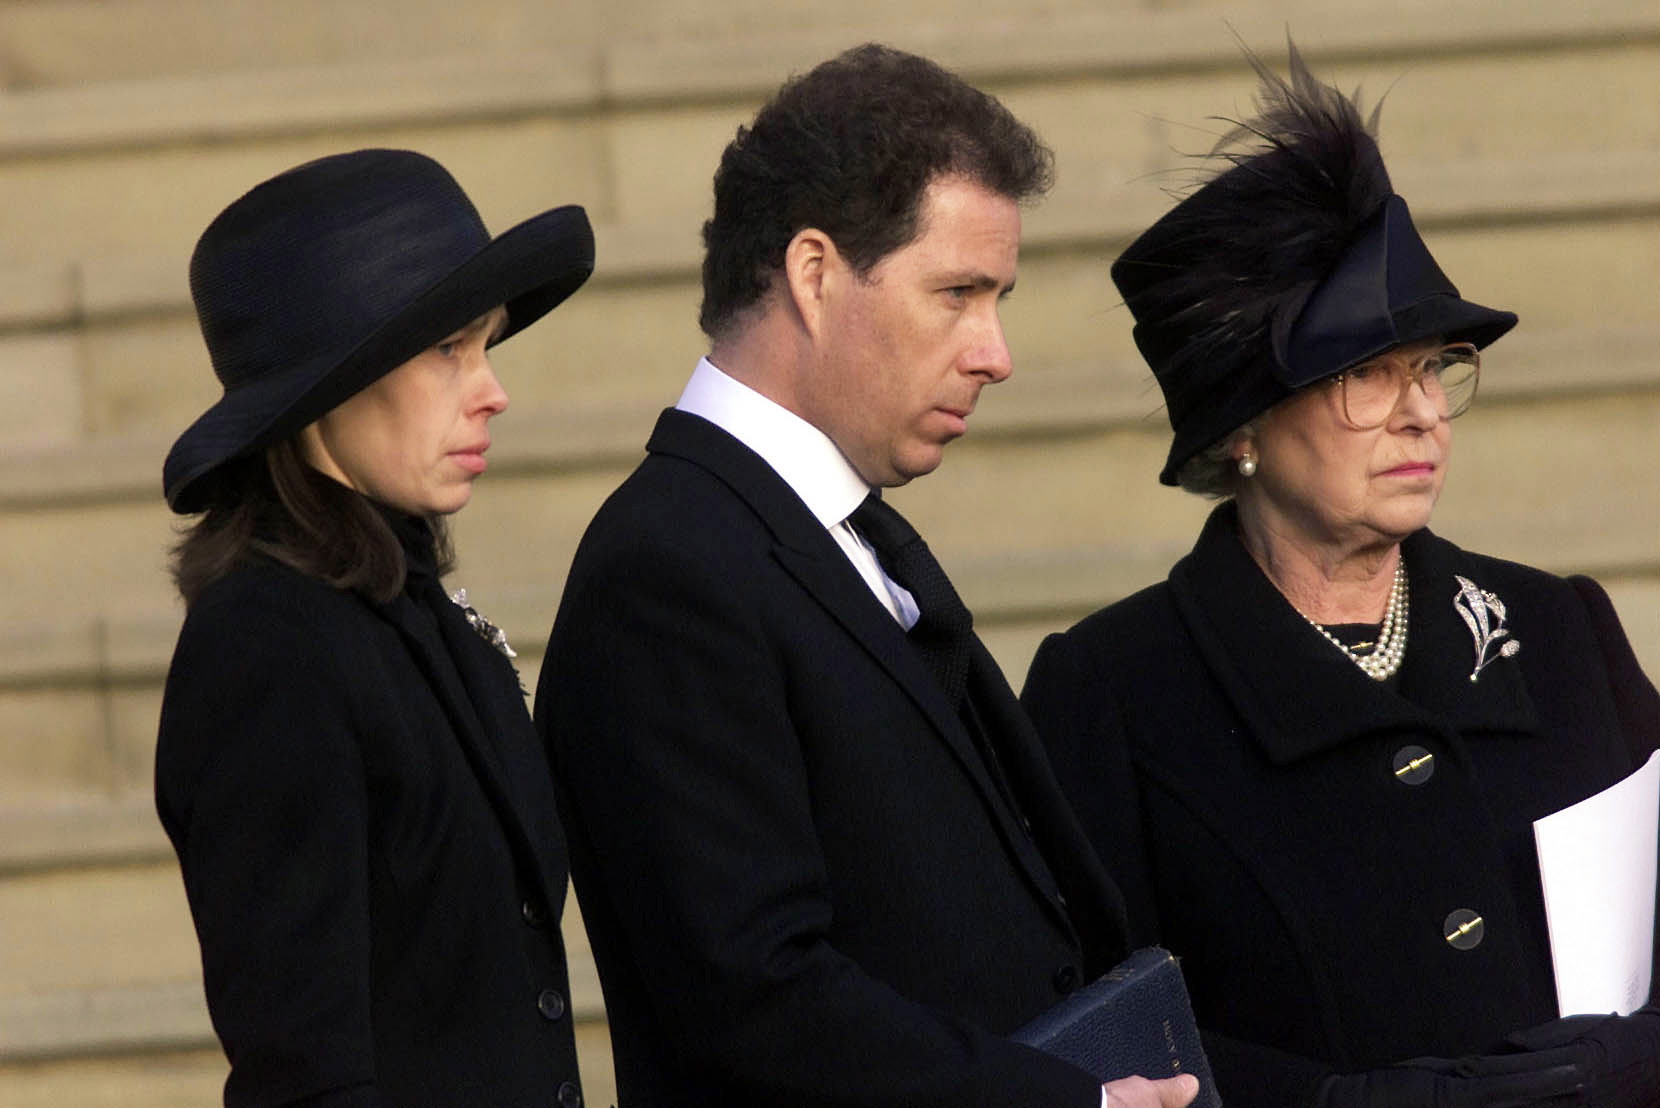 Lady Sarah Chatto, David Armstrong-Jones Linley and Queen Elizabeth II during the funeral of Princess Margaret at St. George's Chapel on February 15, 2002 in Windsor Castle, United Kingdom. | Source: Getty Images